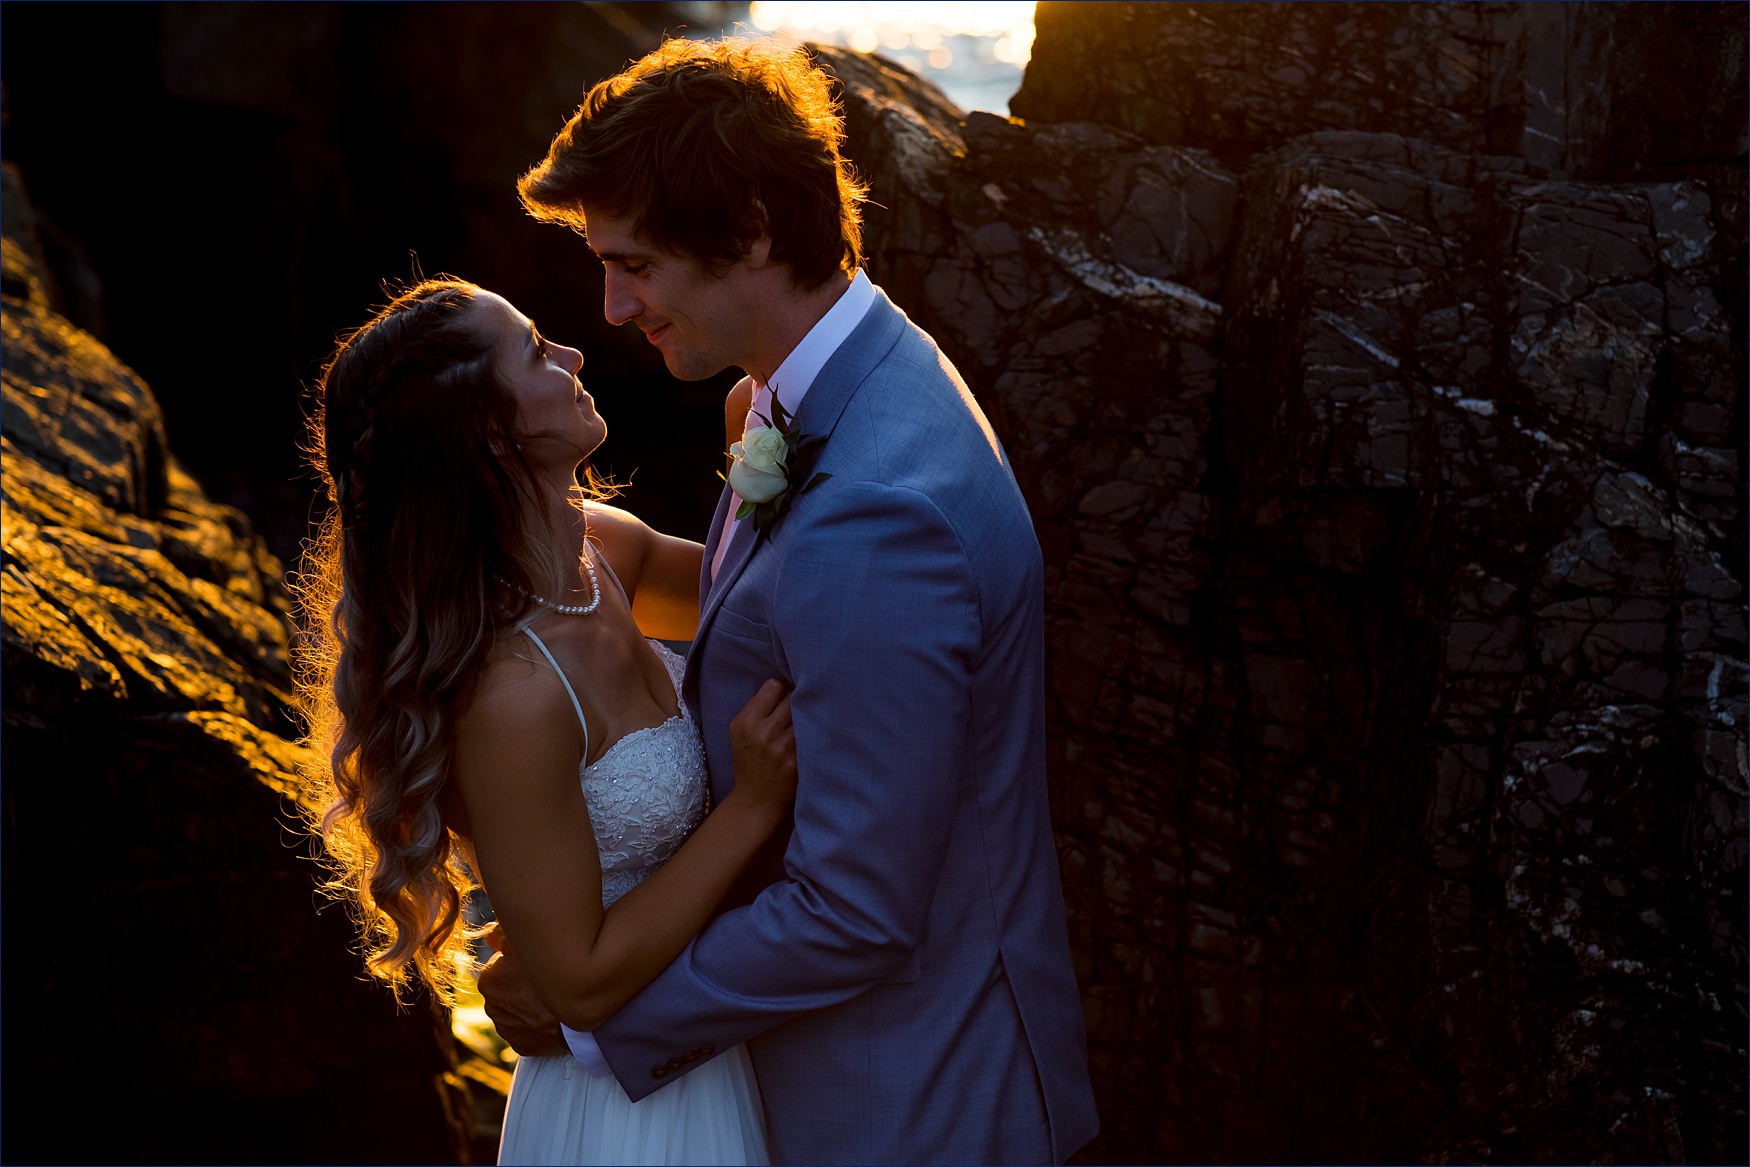 After a Maine elopement, the couple stands close together out in the rocks while the sunrise bathes them in light 